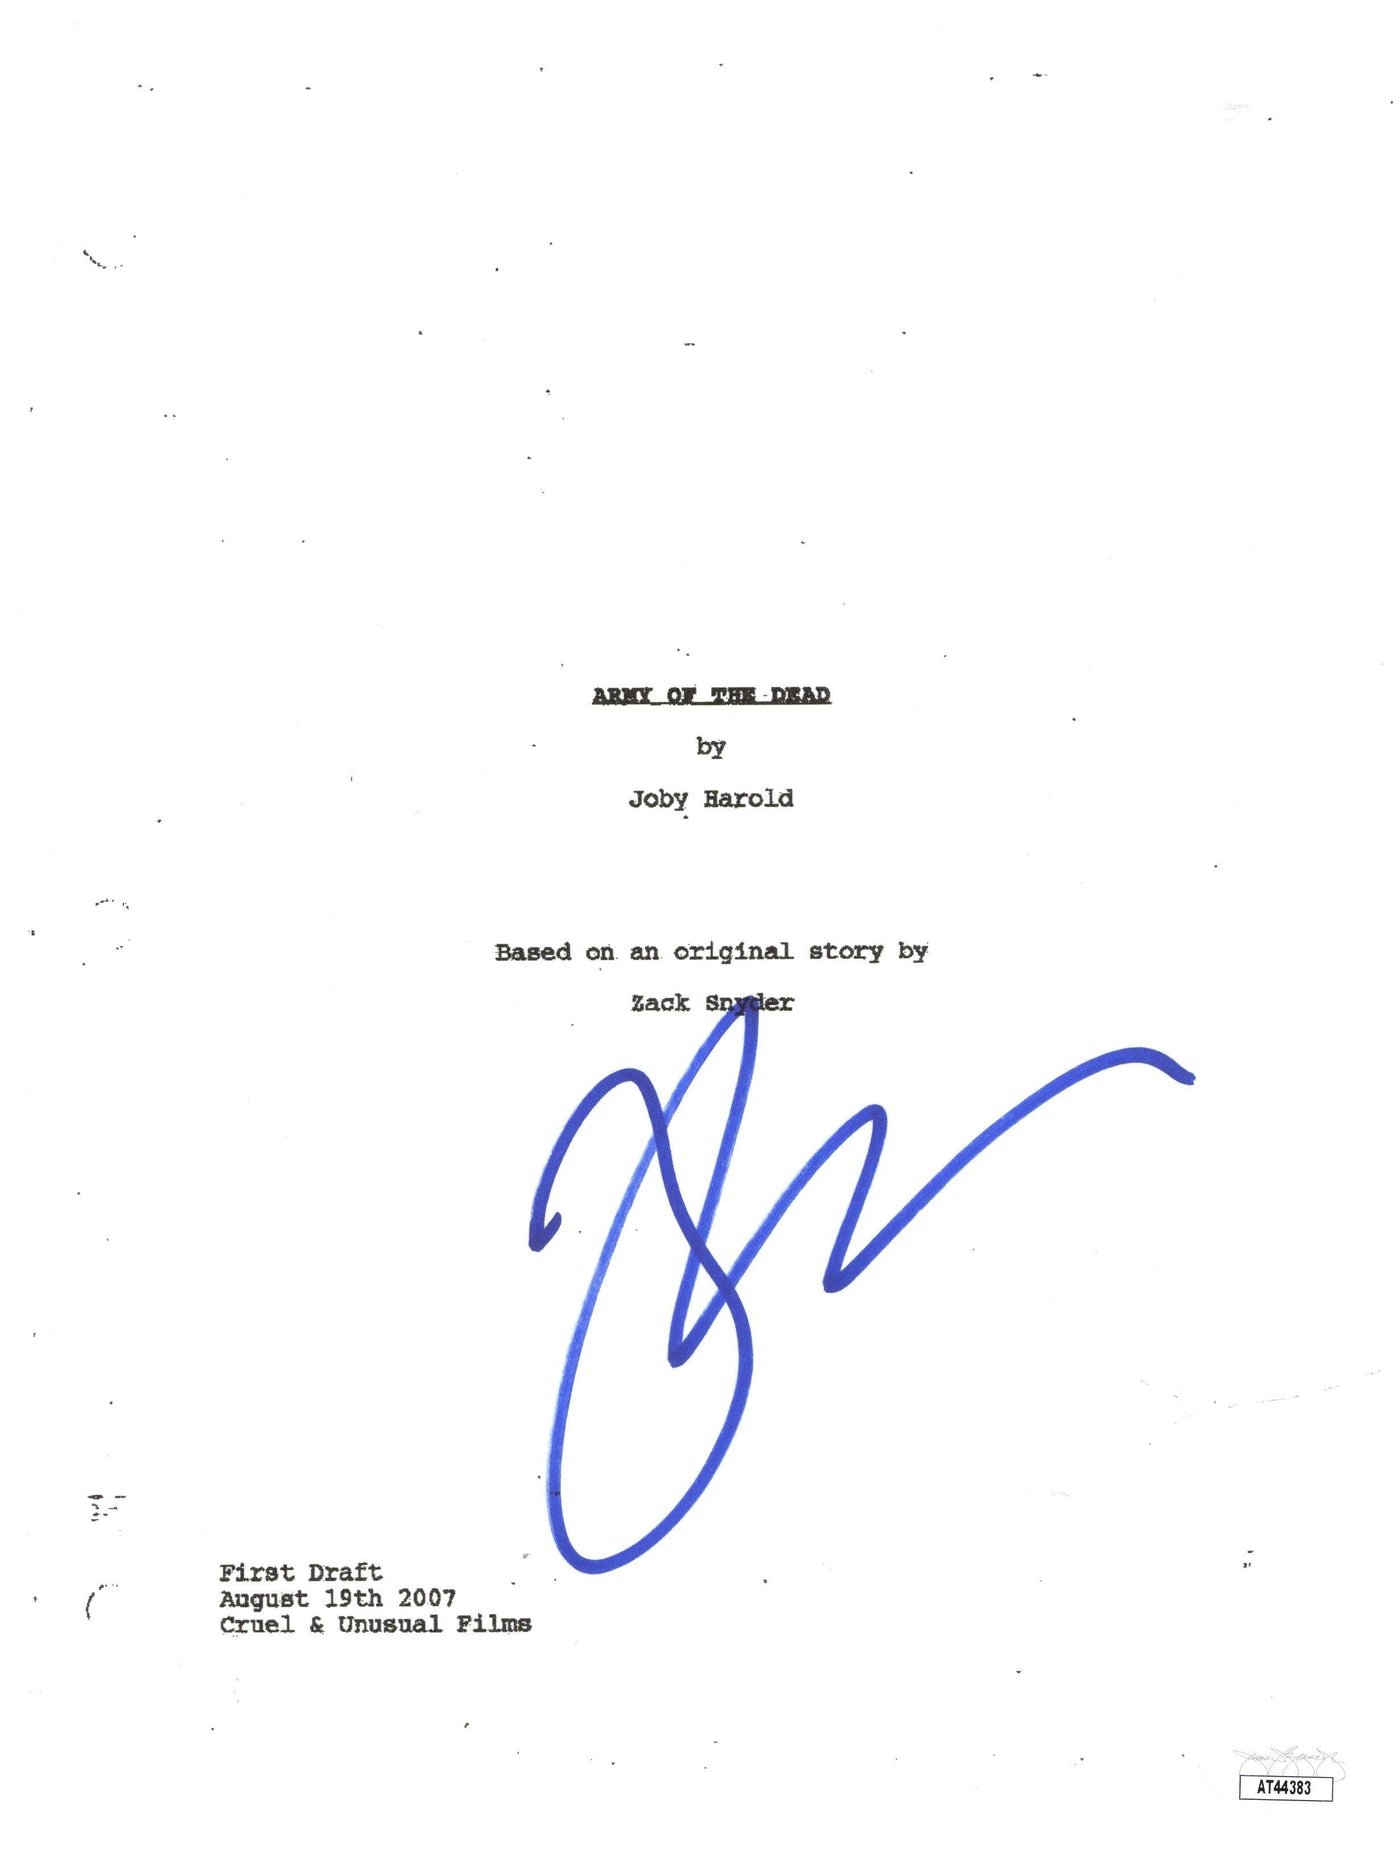 Zack Snyder Signed Army of the Dead Movie Script Cover Autographed JSA COA #2